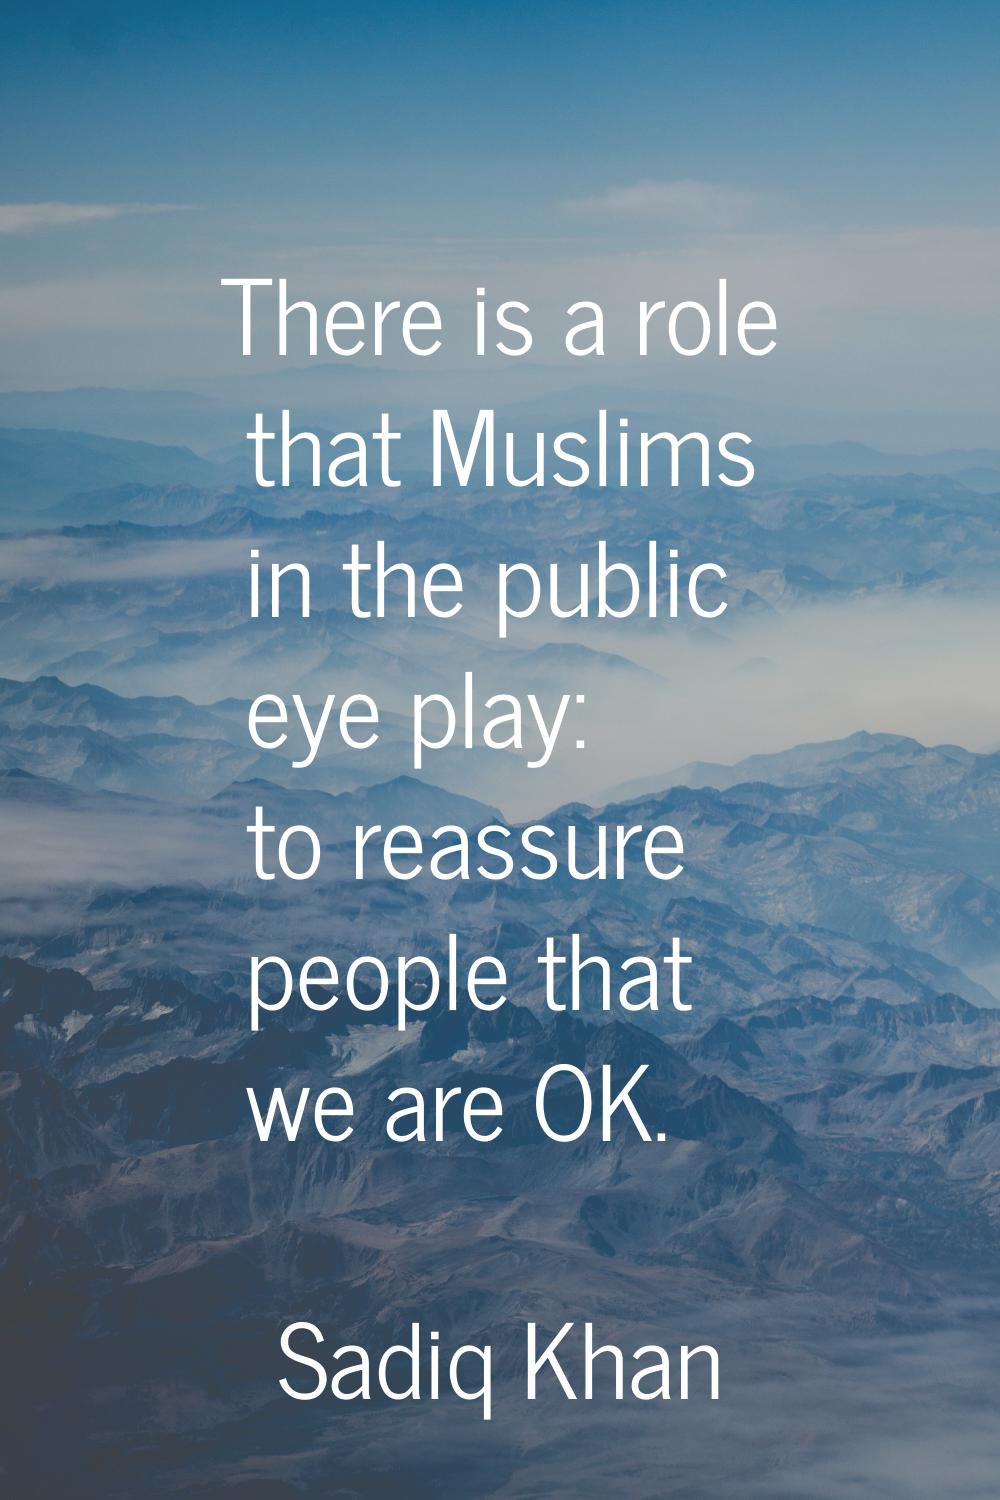 There is a role that Muslims in the public eye play: to reassure people that we are OK.